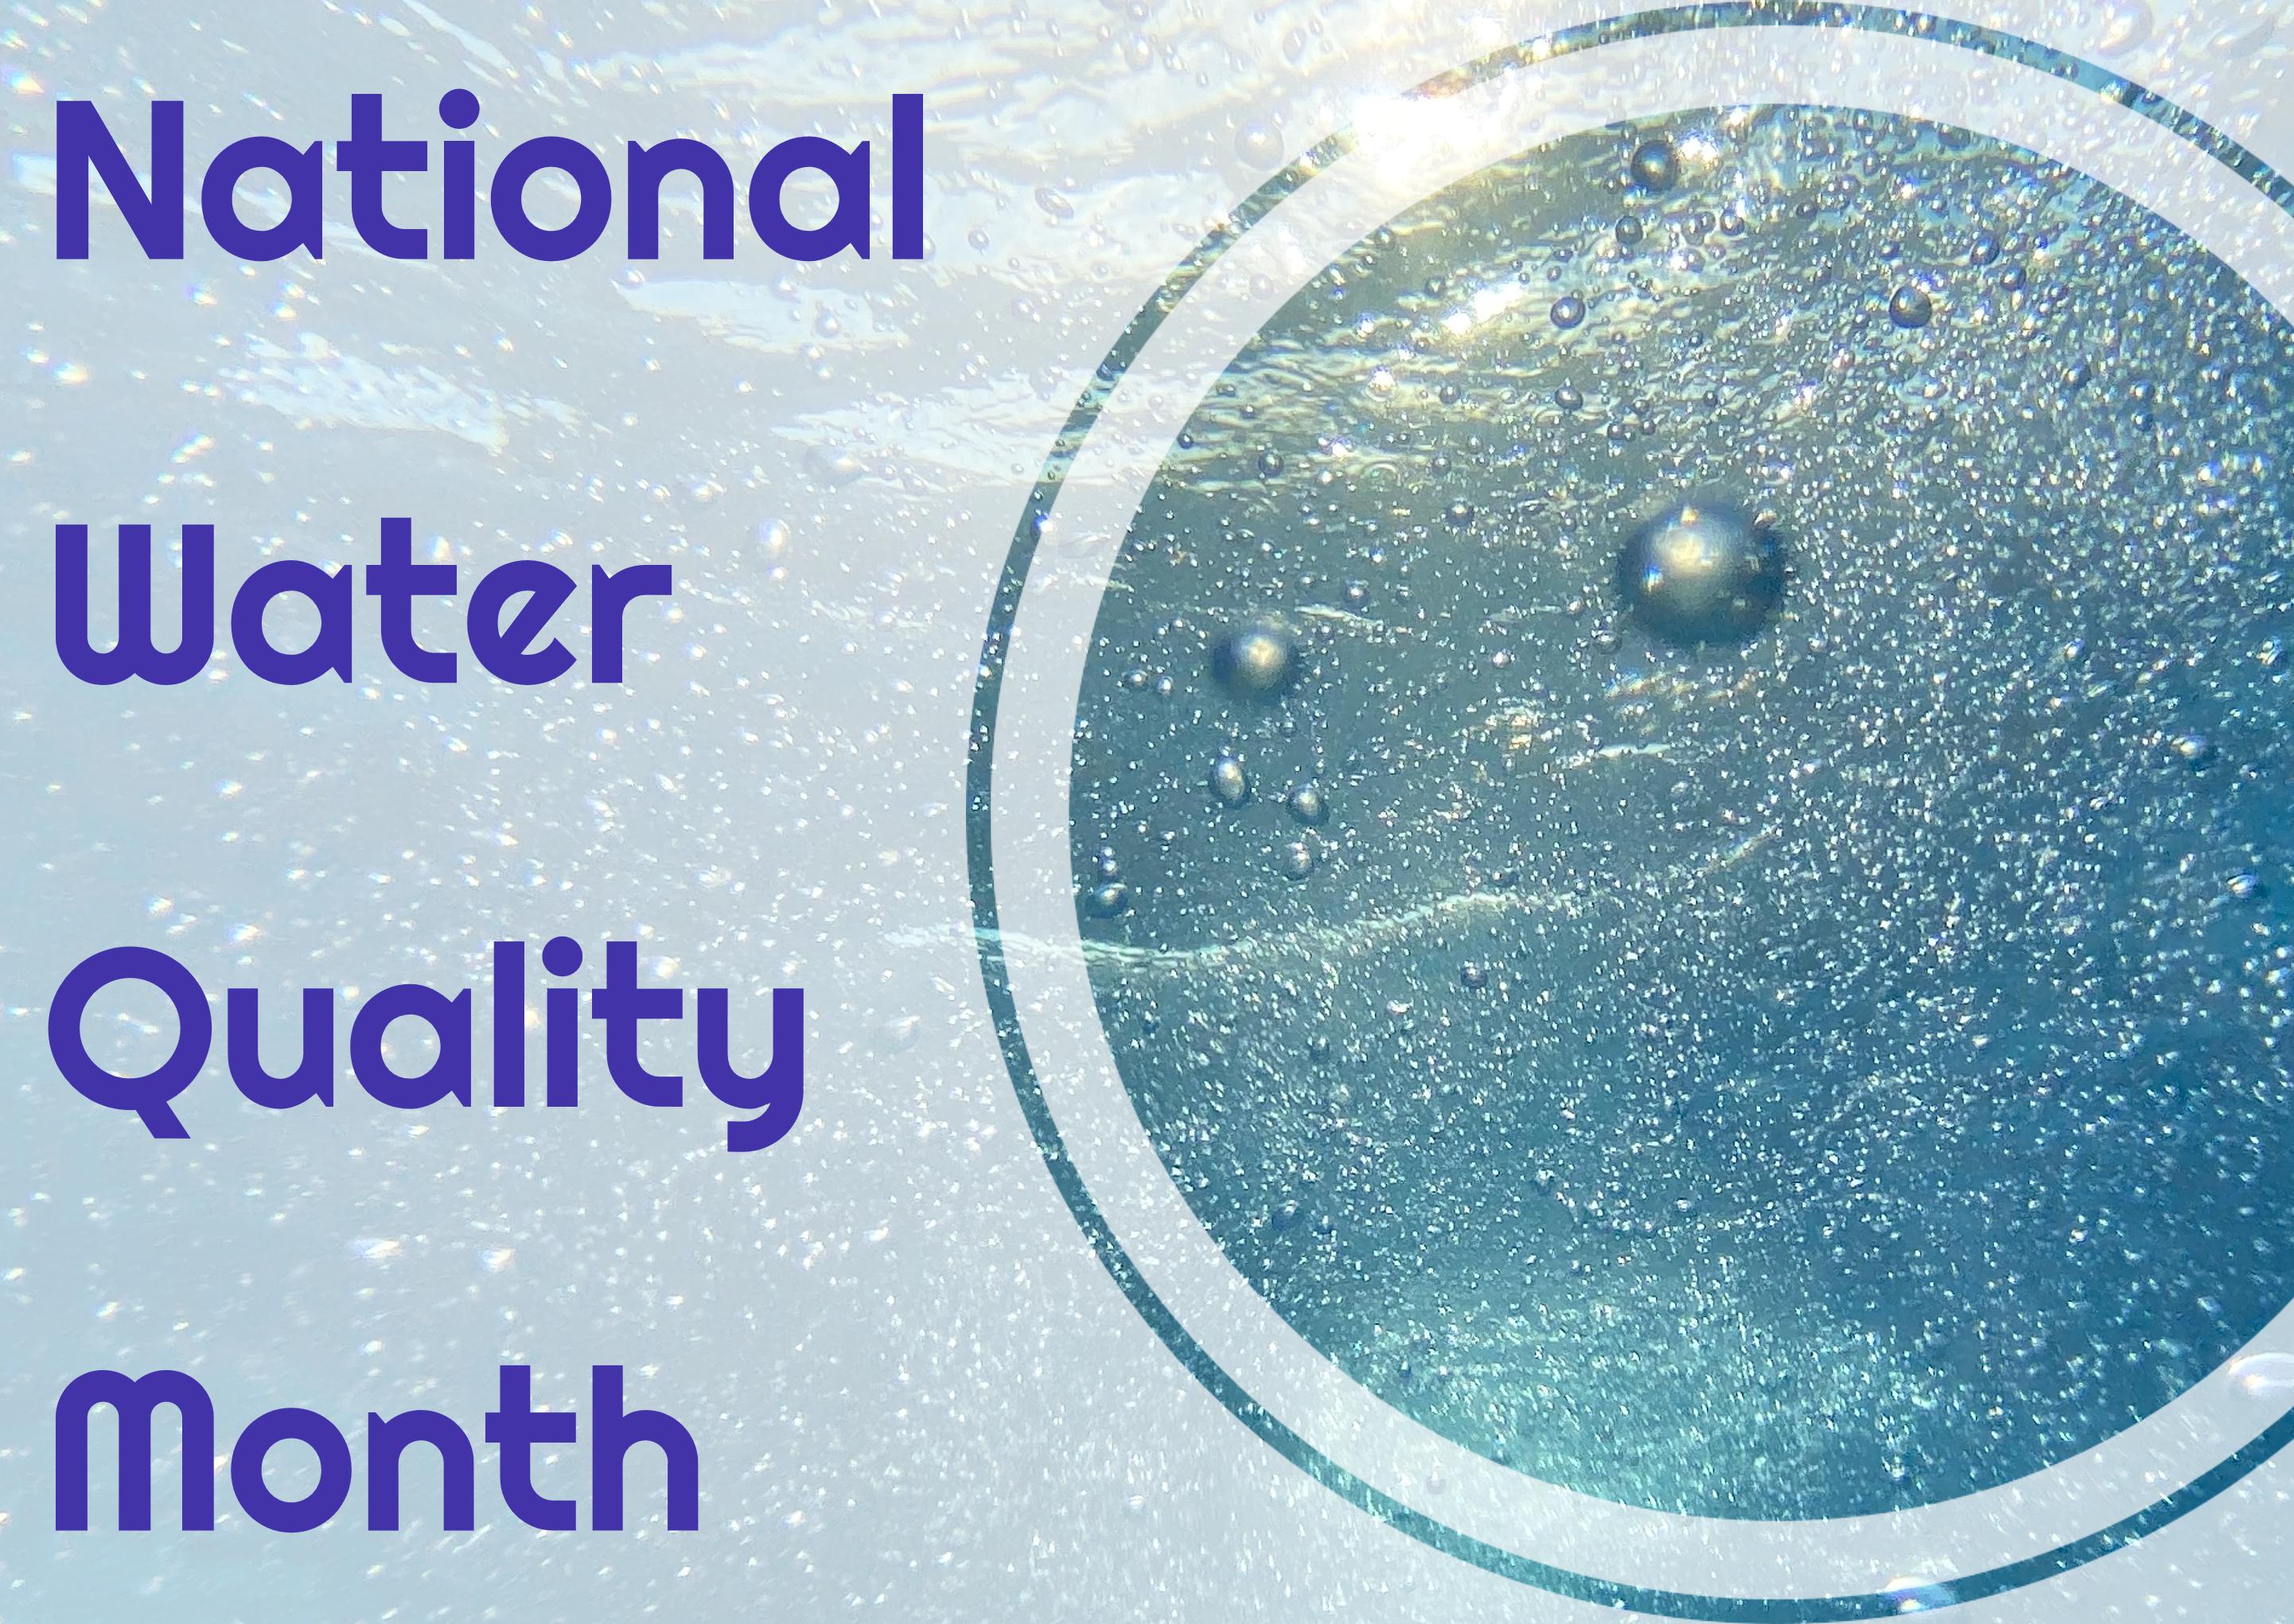 Image of the ocean with the words National Water Quality Month on it